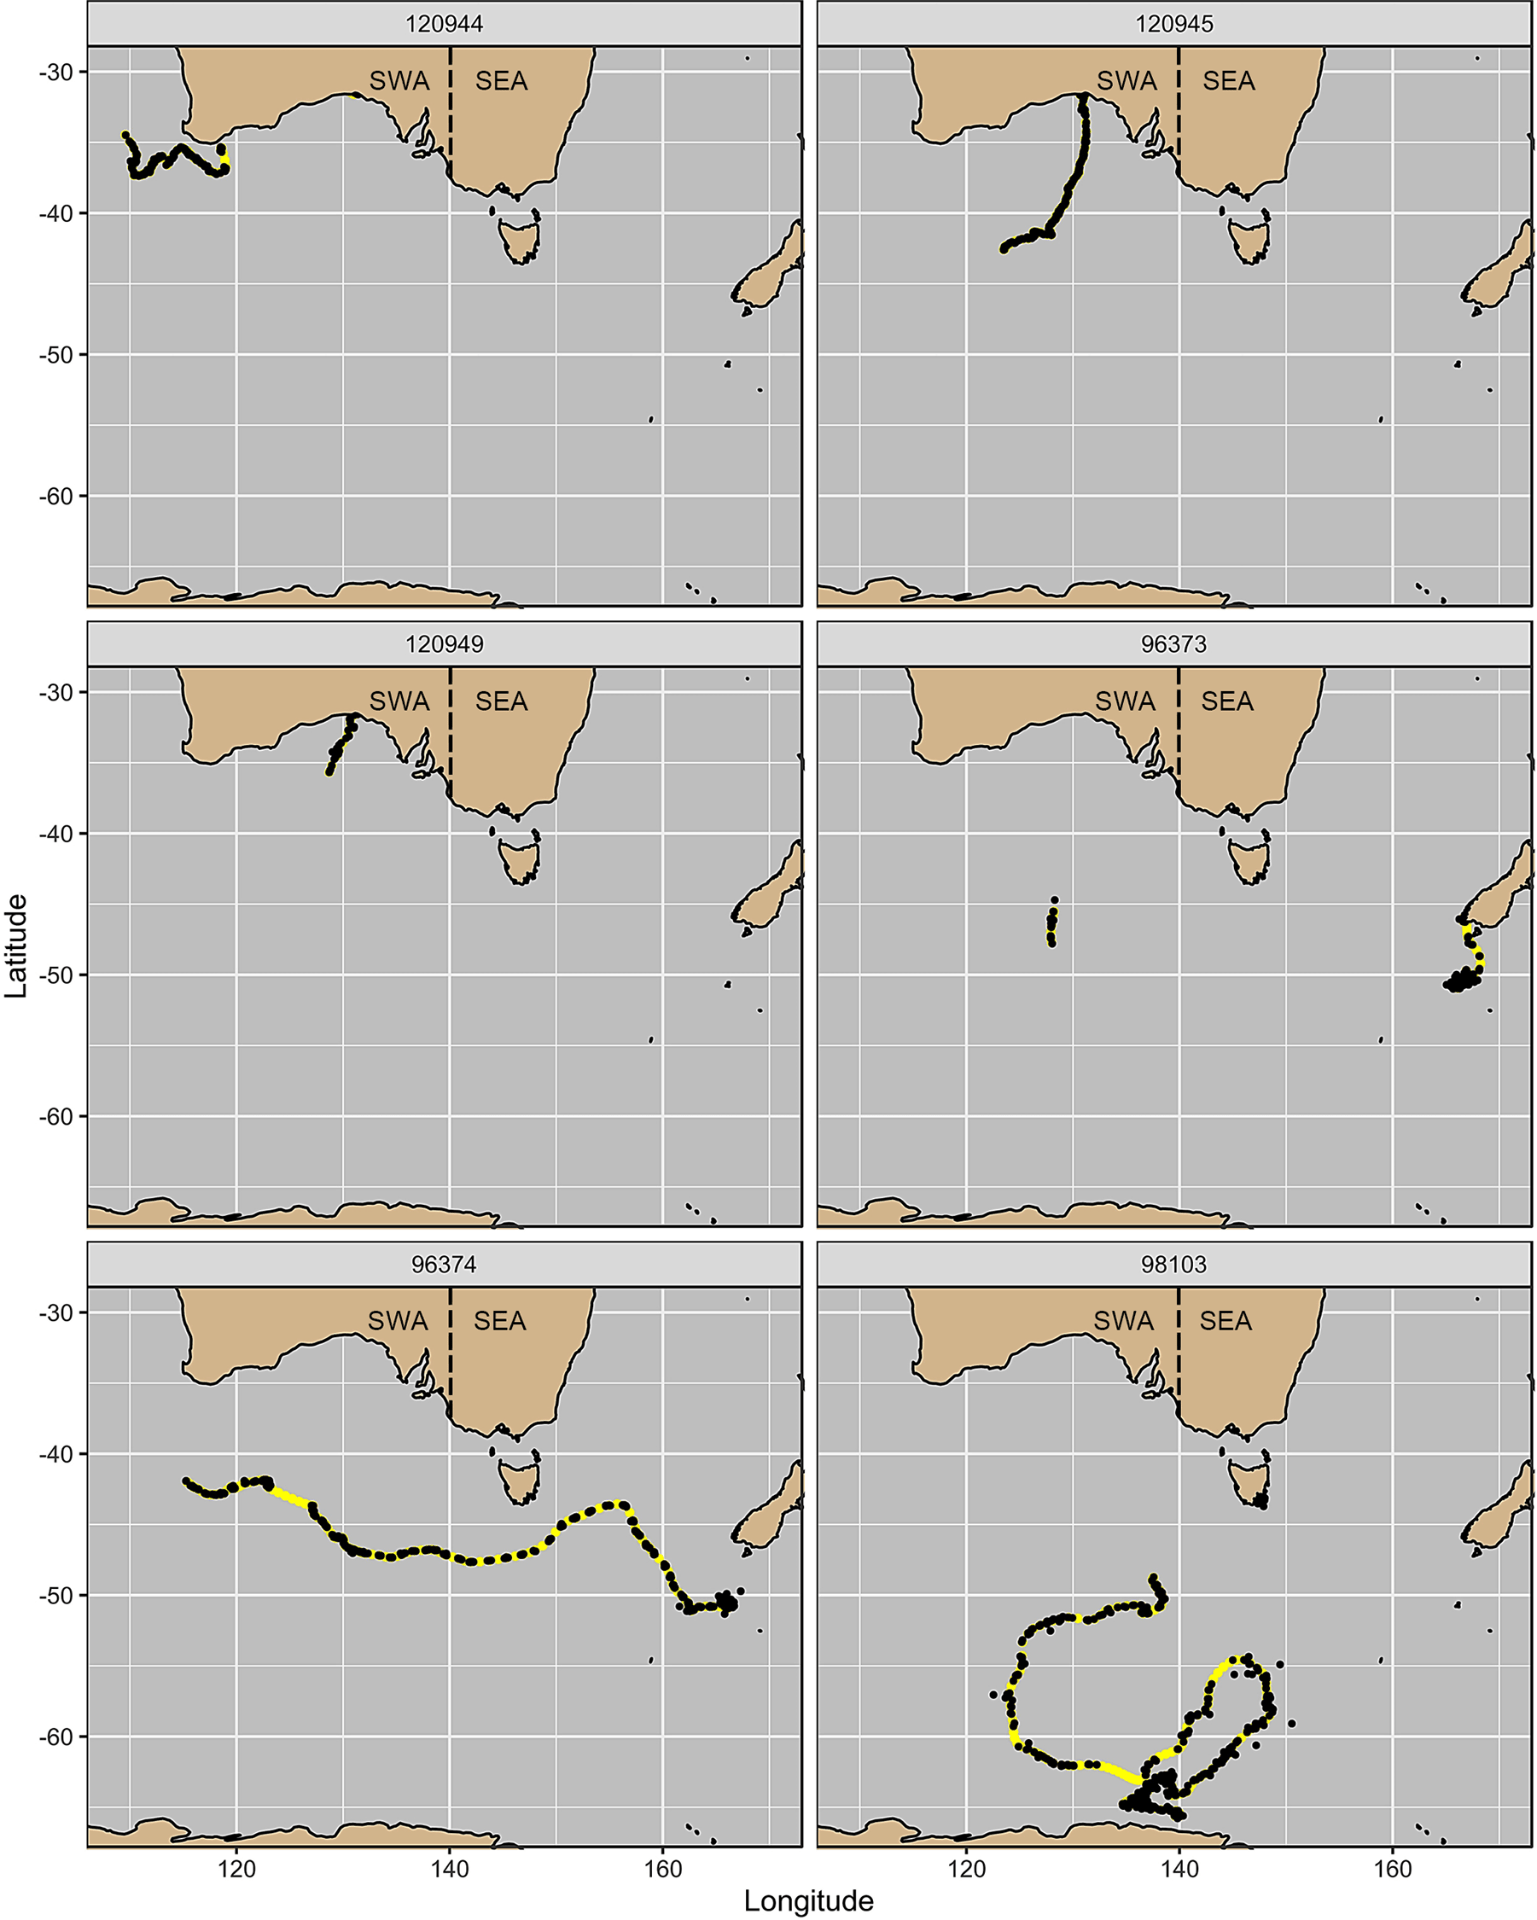 A series of six maps of the Southern Ocean below Australia and New Zealand show the routes of southern right whales as determined by satellite tracking